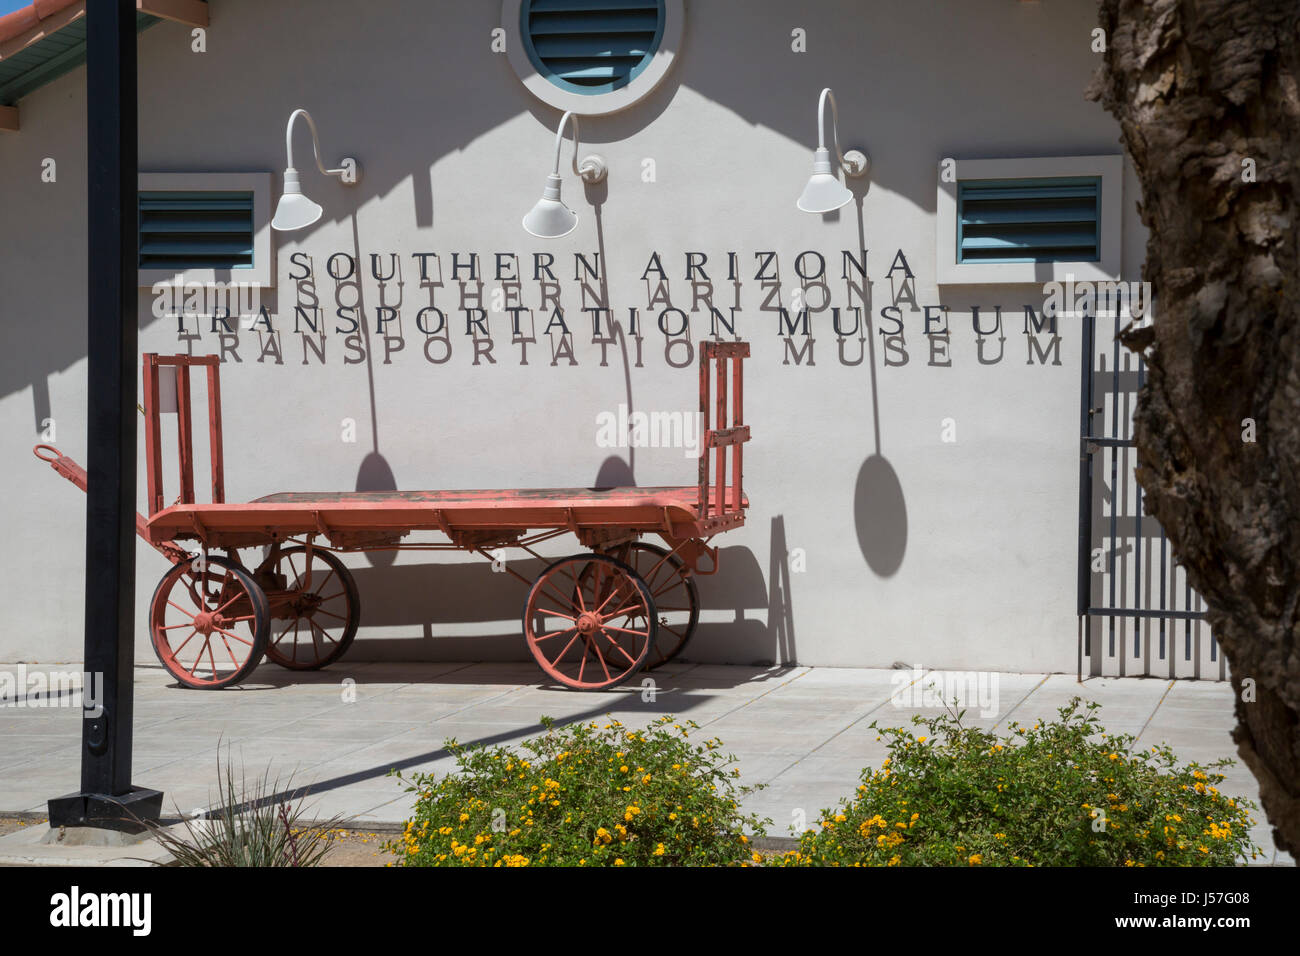 Tucson, Arizona - The Southern Arizona Transportation Museum, located in the old Southern Pacific Depot. Stock Photo